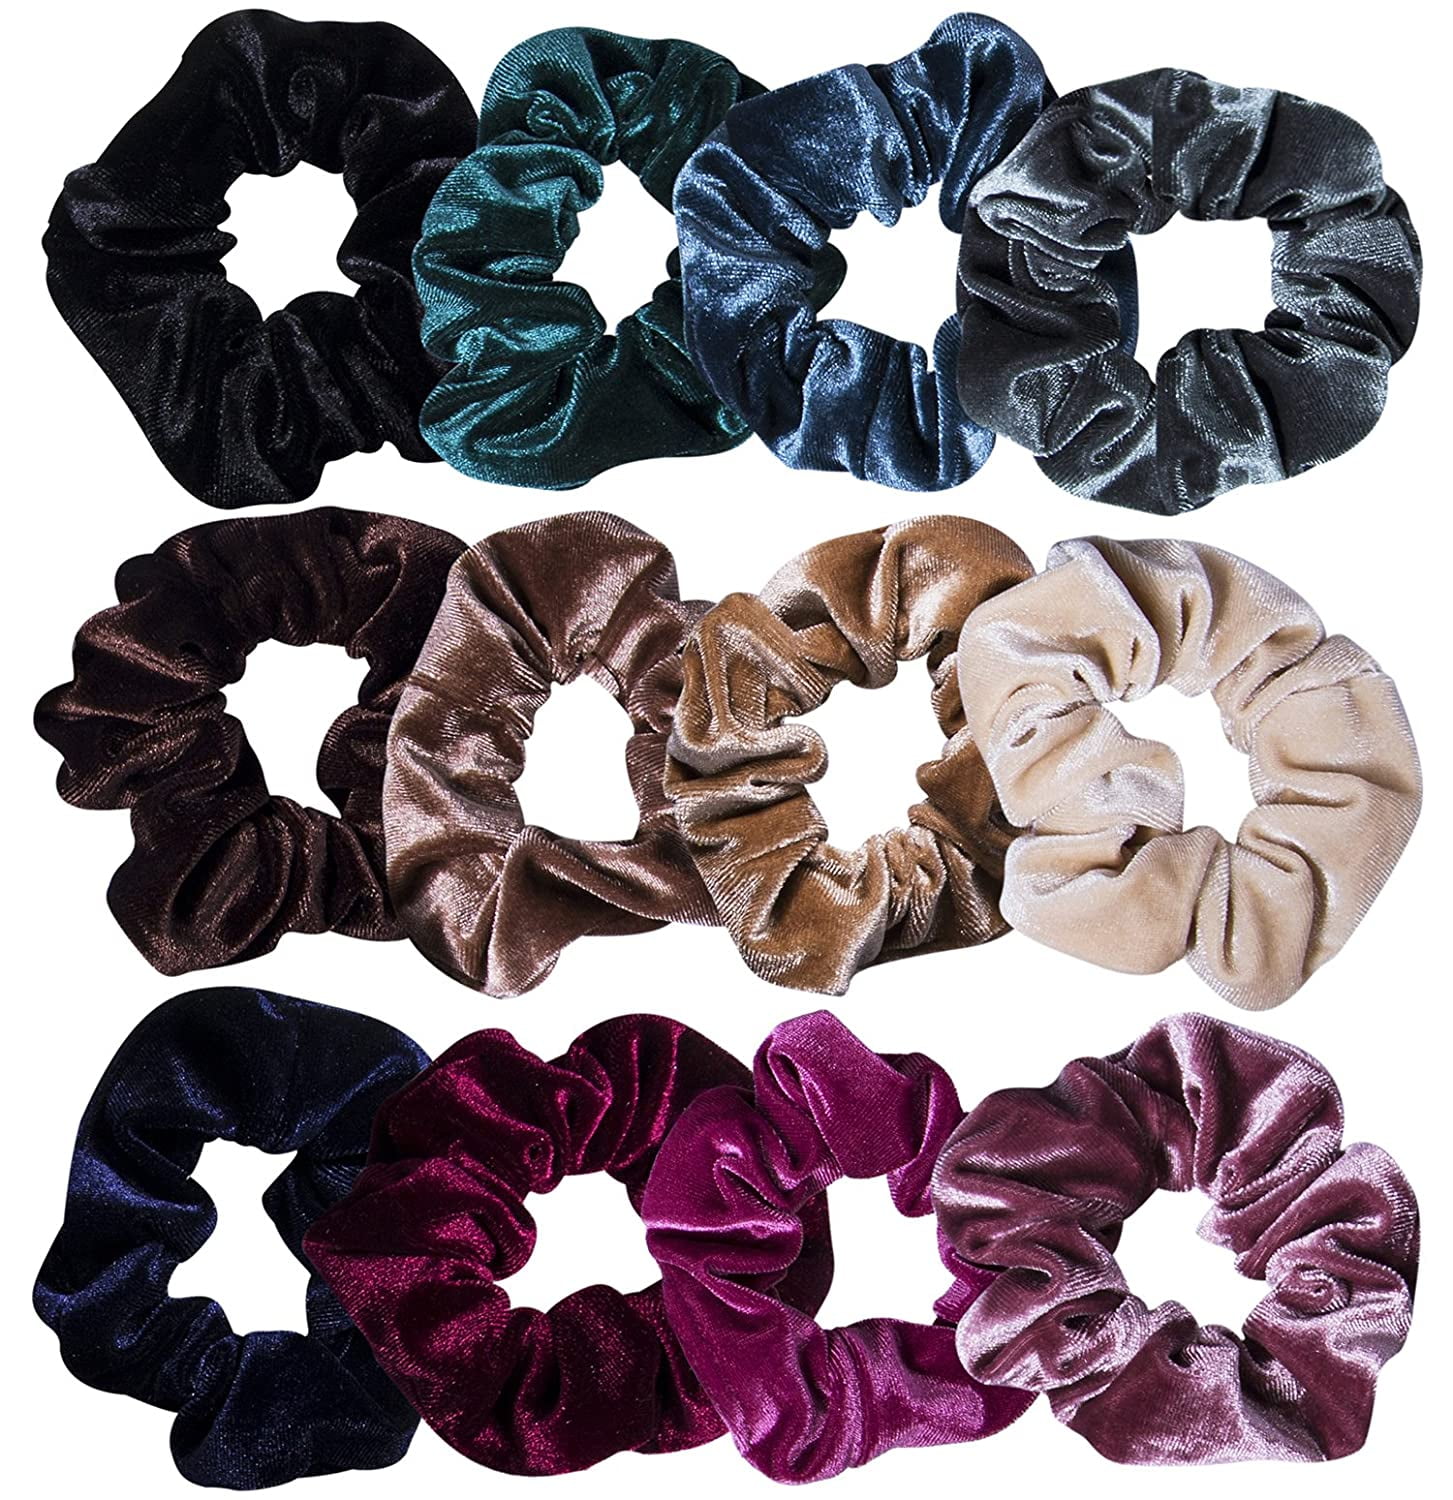 12 Pieces Women's Assorted Hair Rope Rubber Band Hair Ties Scrunchies Set